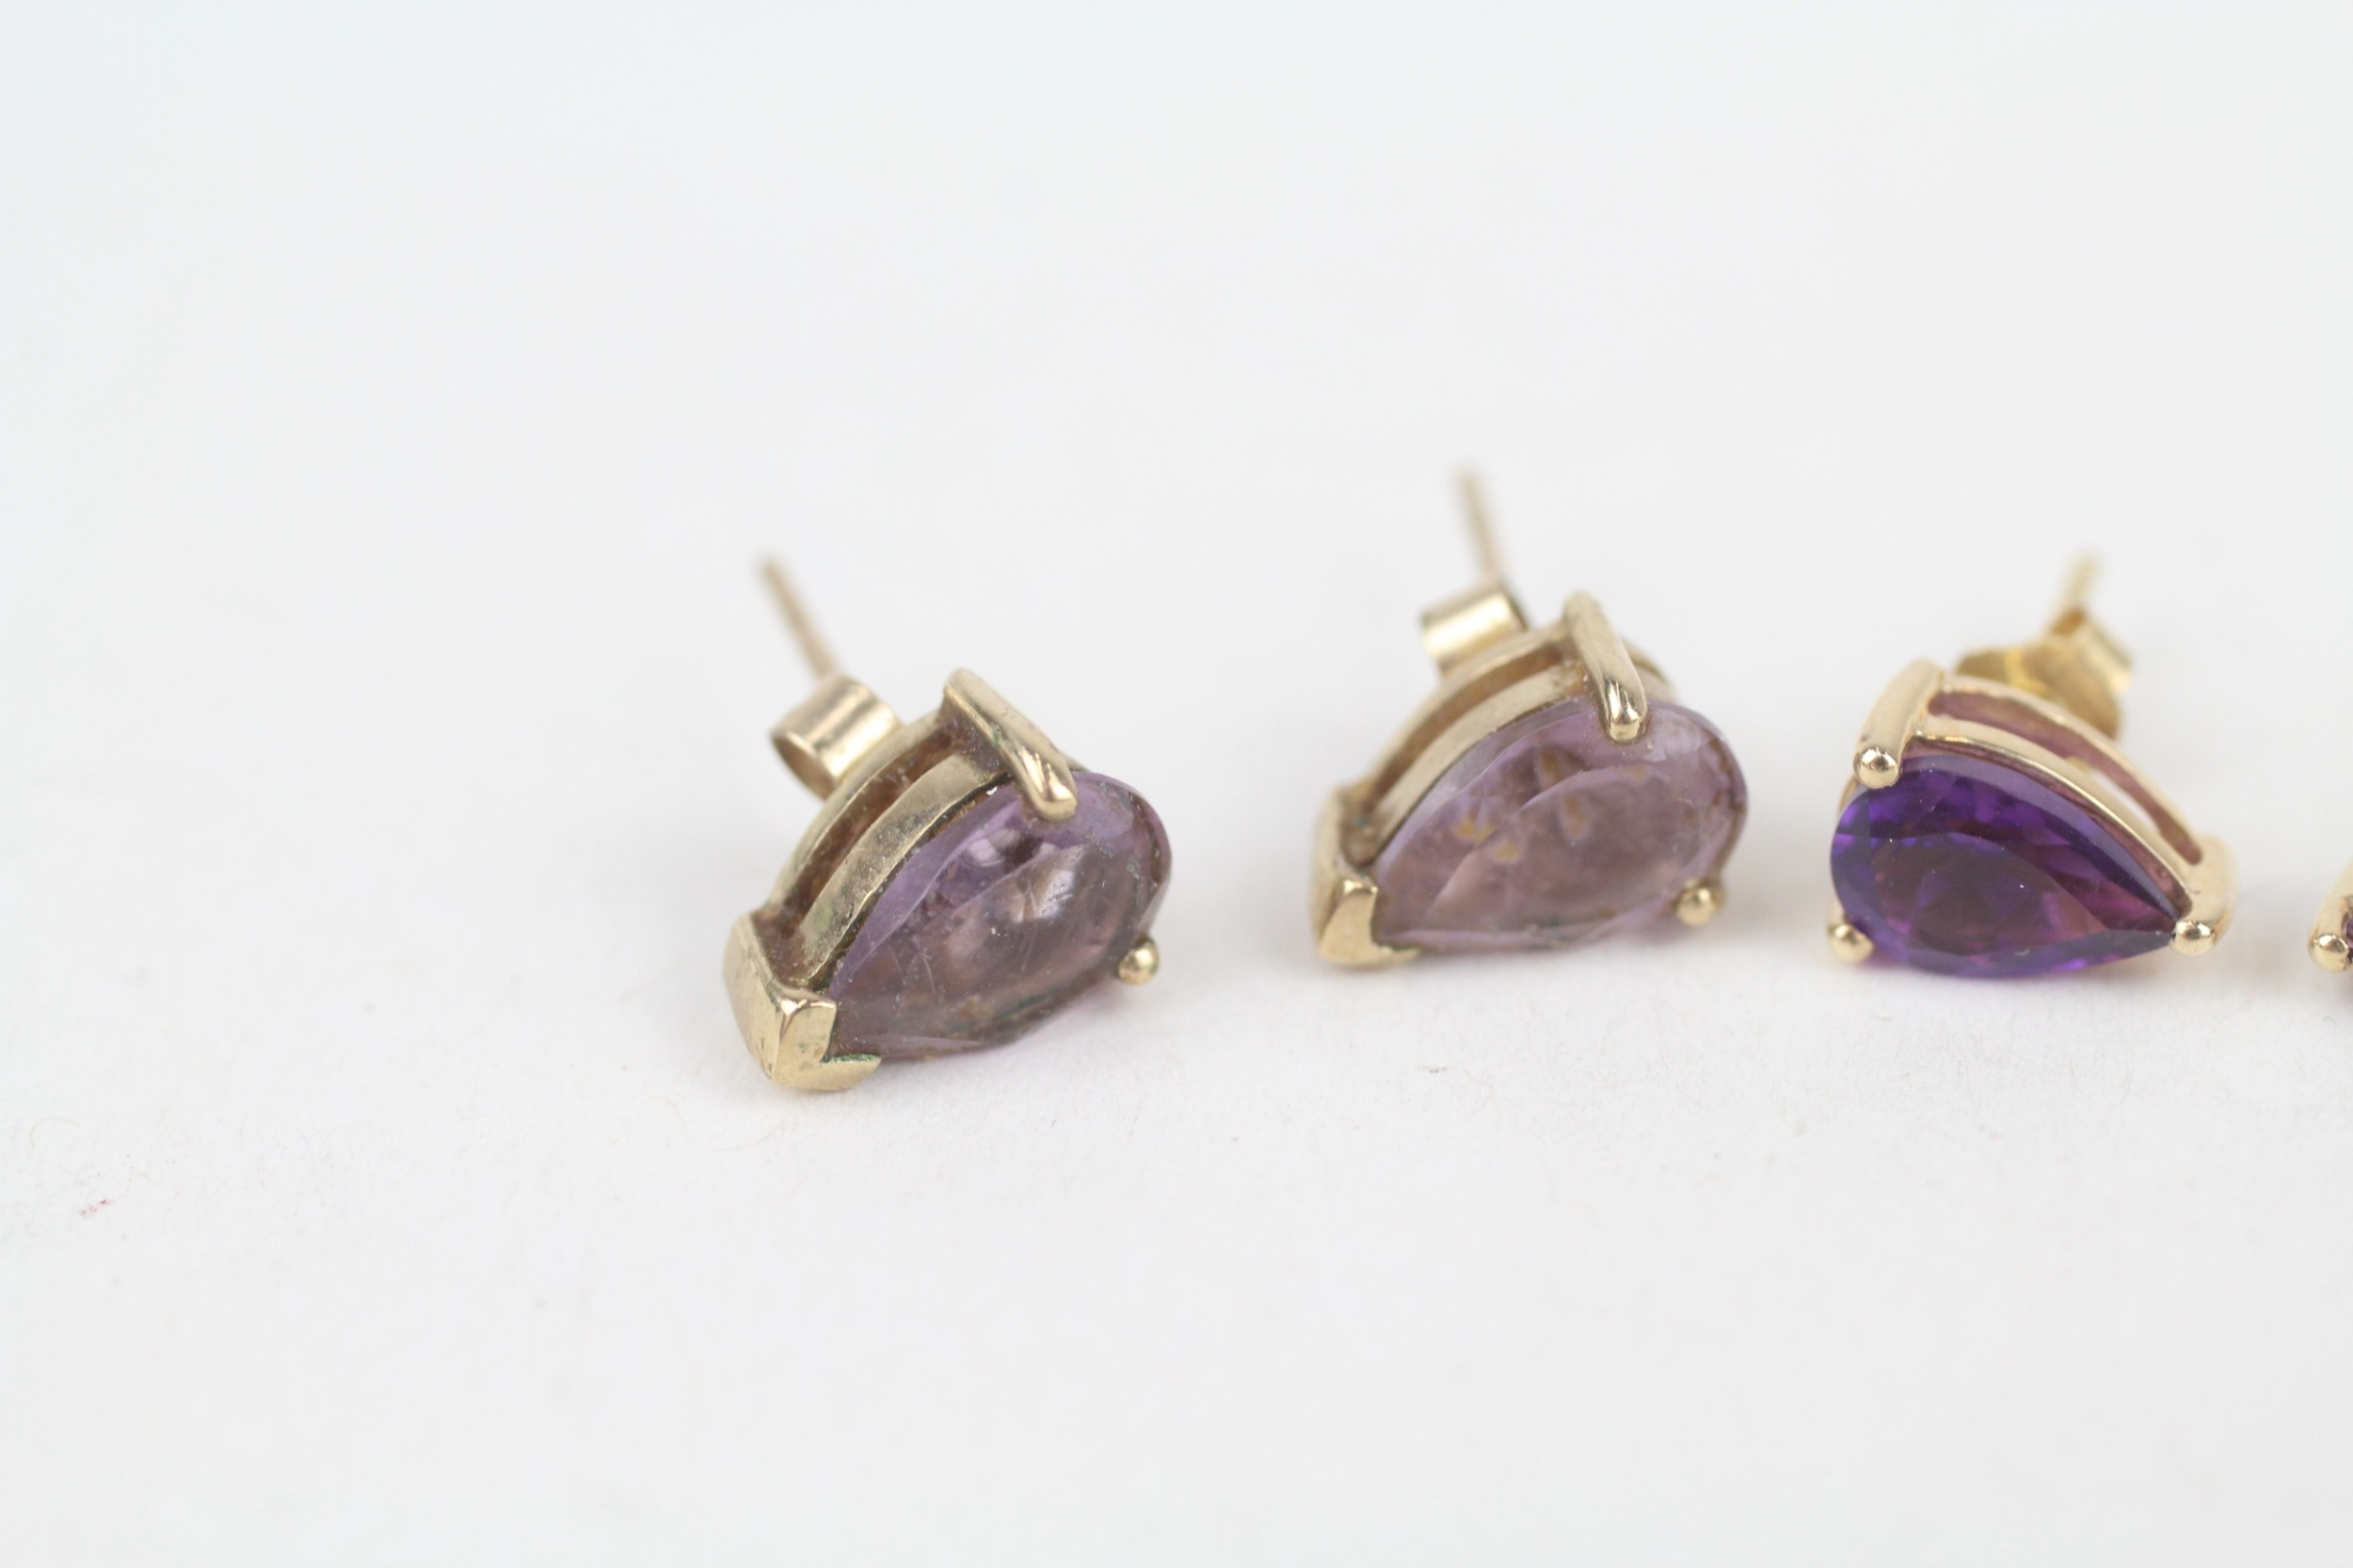 2x 9ct gold pear cut amethyst stud earrings with scroll backs - Image 4 of 4